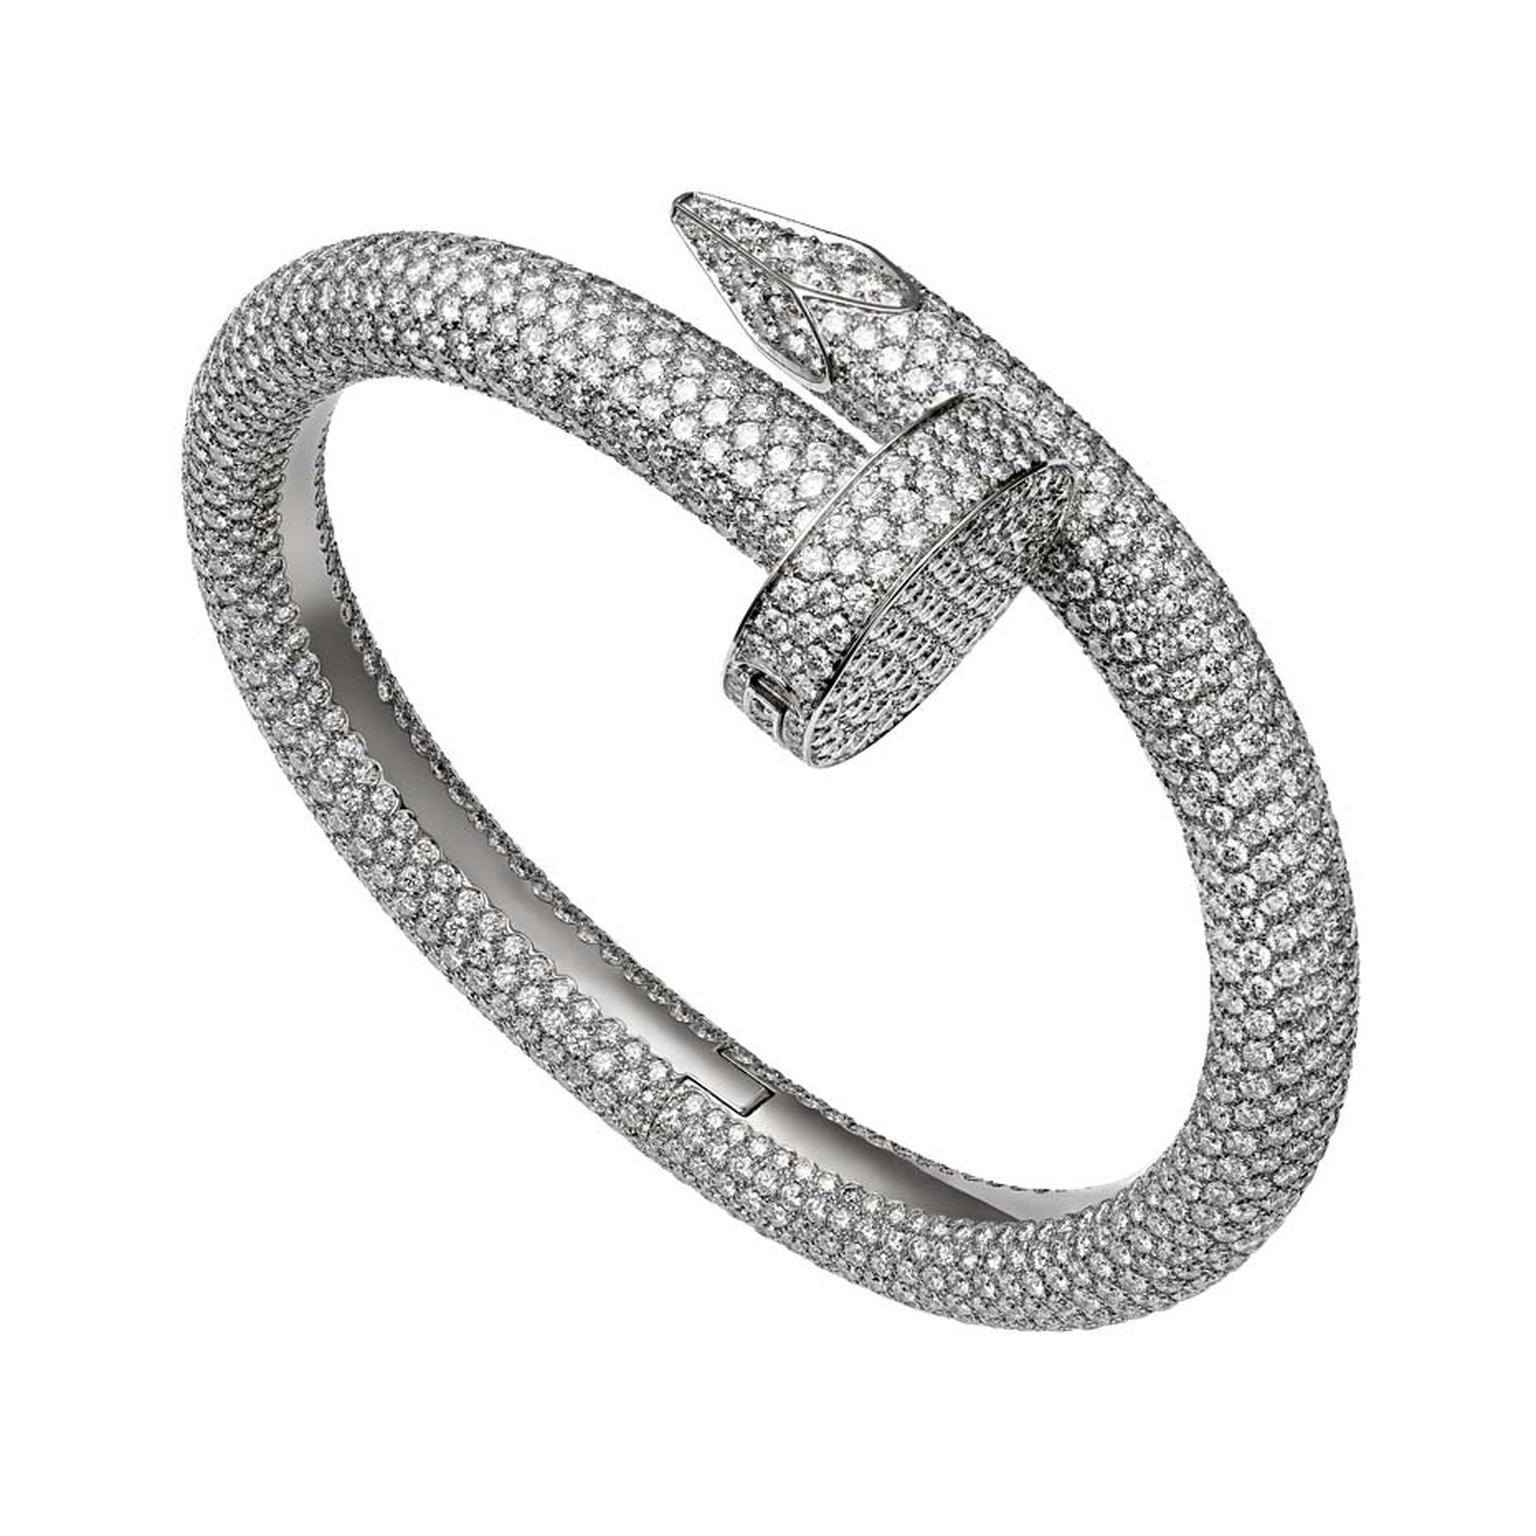 A fully diamond-pavéd interpretation of Cartier's Juste un Clou bracelet - a triumphant design from the 1970s - was launched recently.